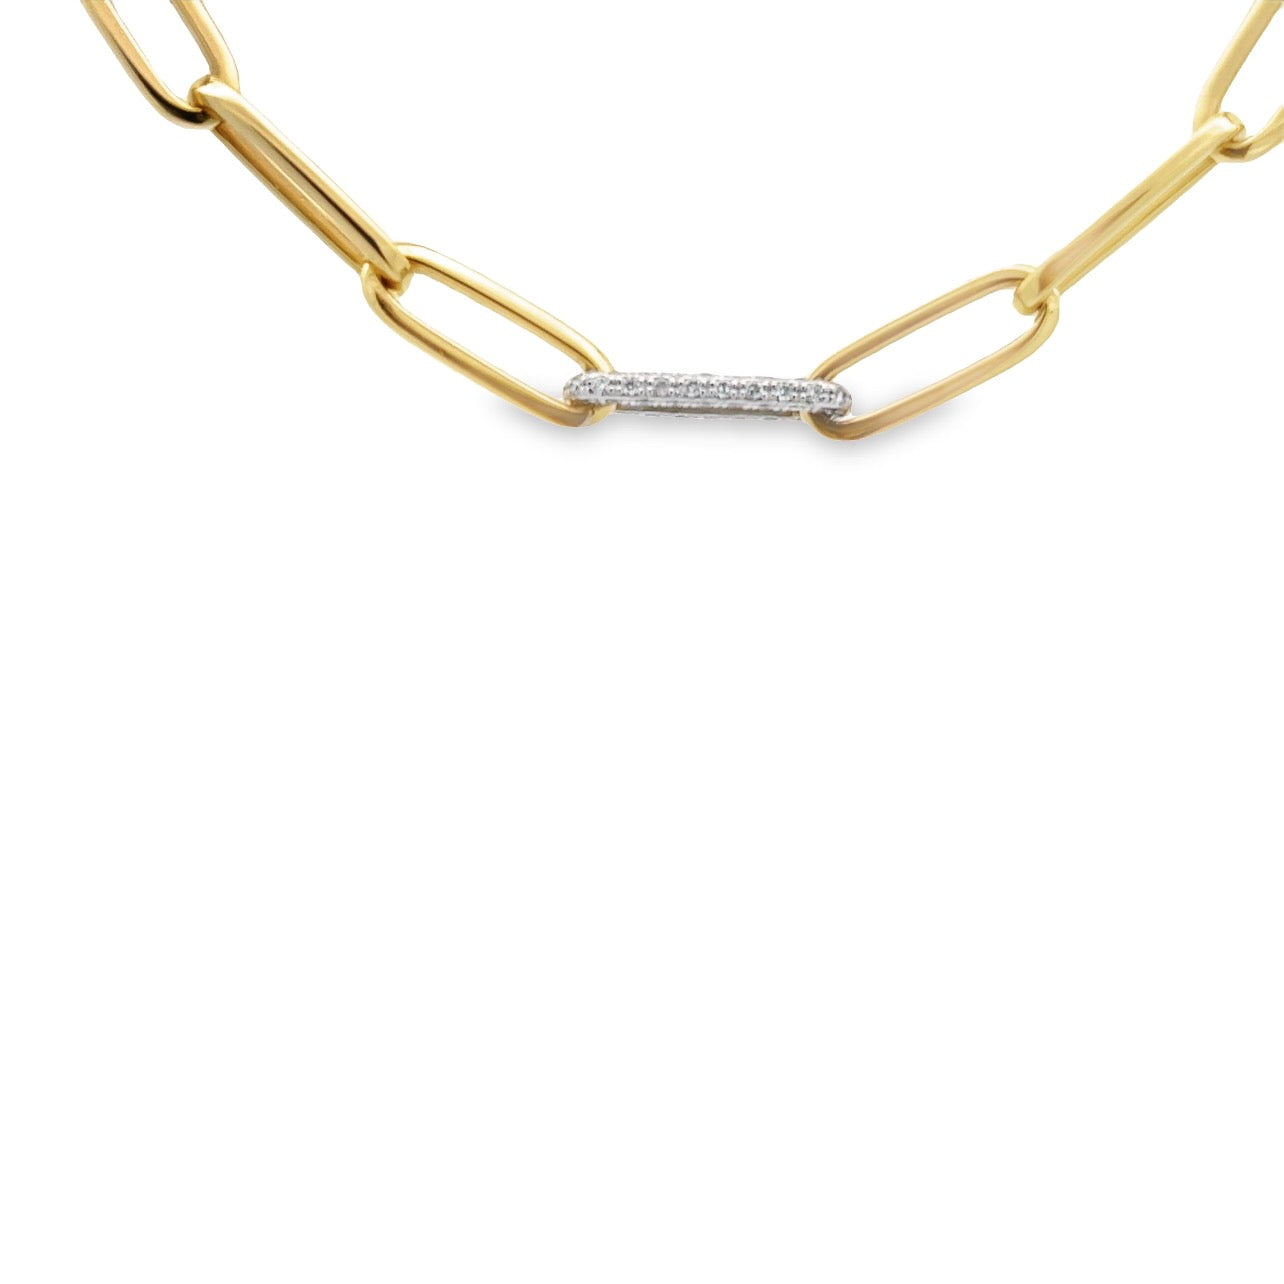 Two-Tone Diamond and Gold Paperclip Link Bracelet